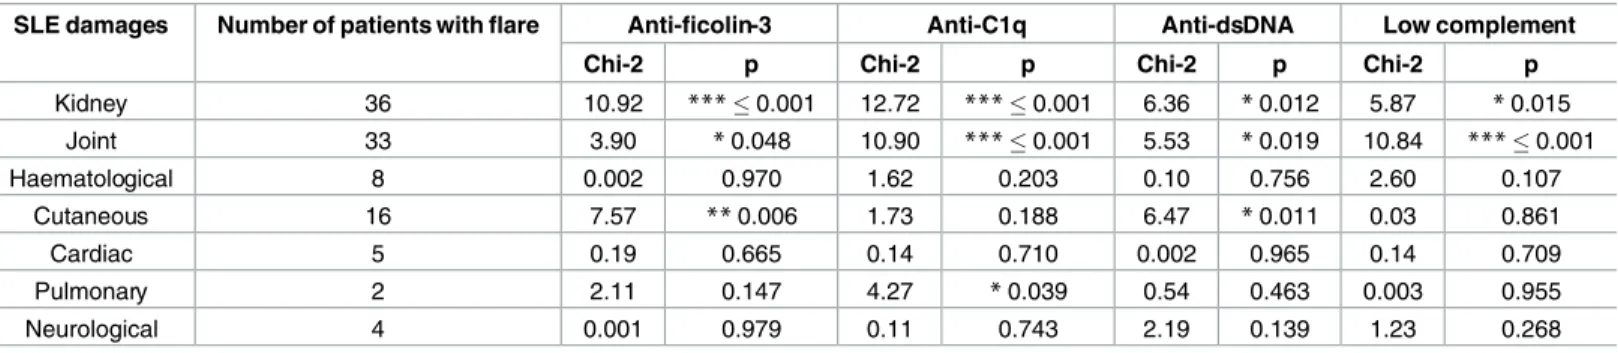 Table 2. Associations between SLE-related clinical features of 77 patients with active SLE and titers of anti-ficolin-3, anti-C1q and anti-dsDNA antibodies.